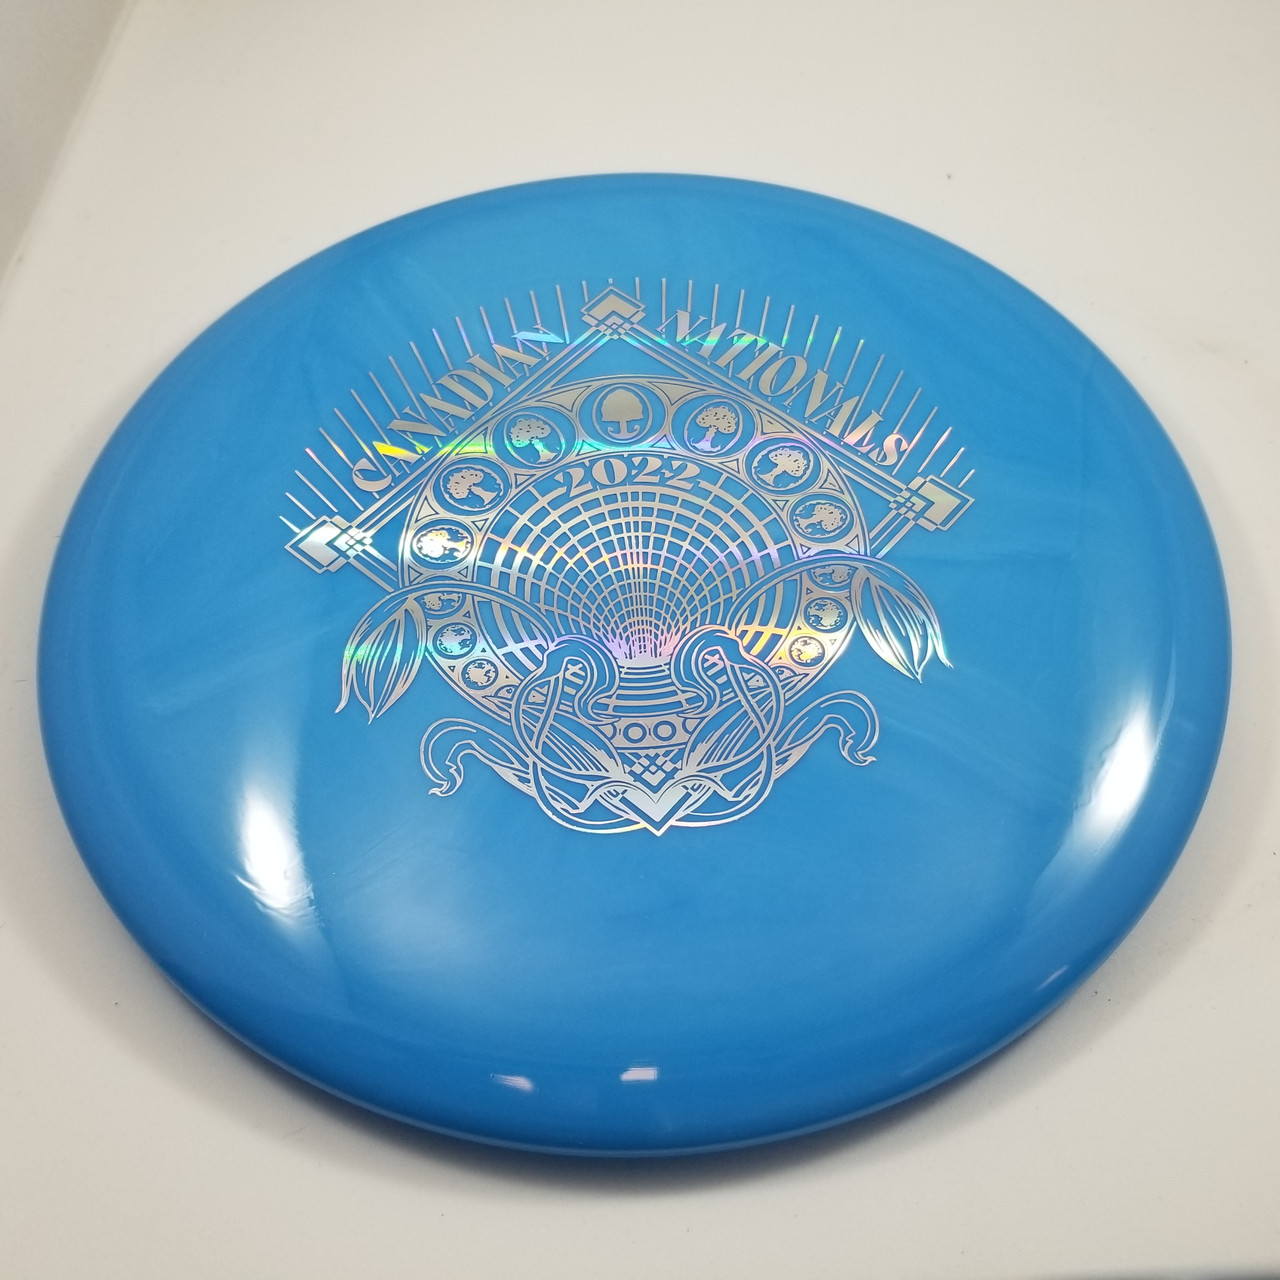 Discmania Method Lux Canadian Nationals 2022 Blue-Silver Holo 179g